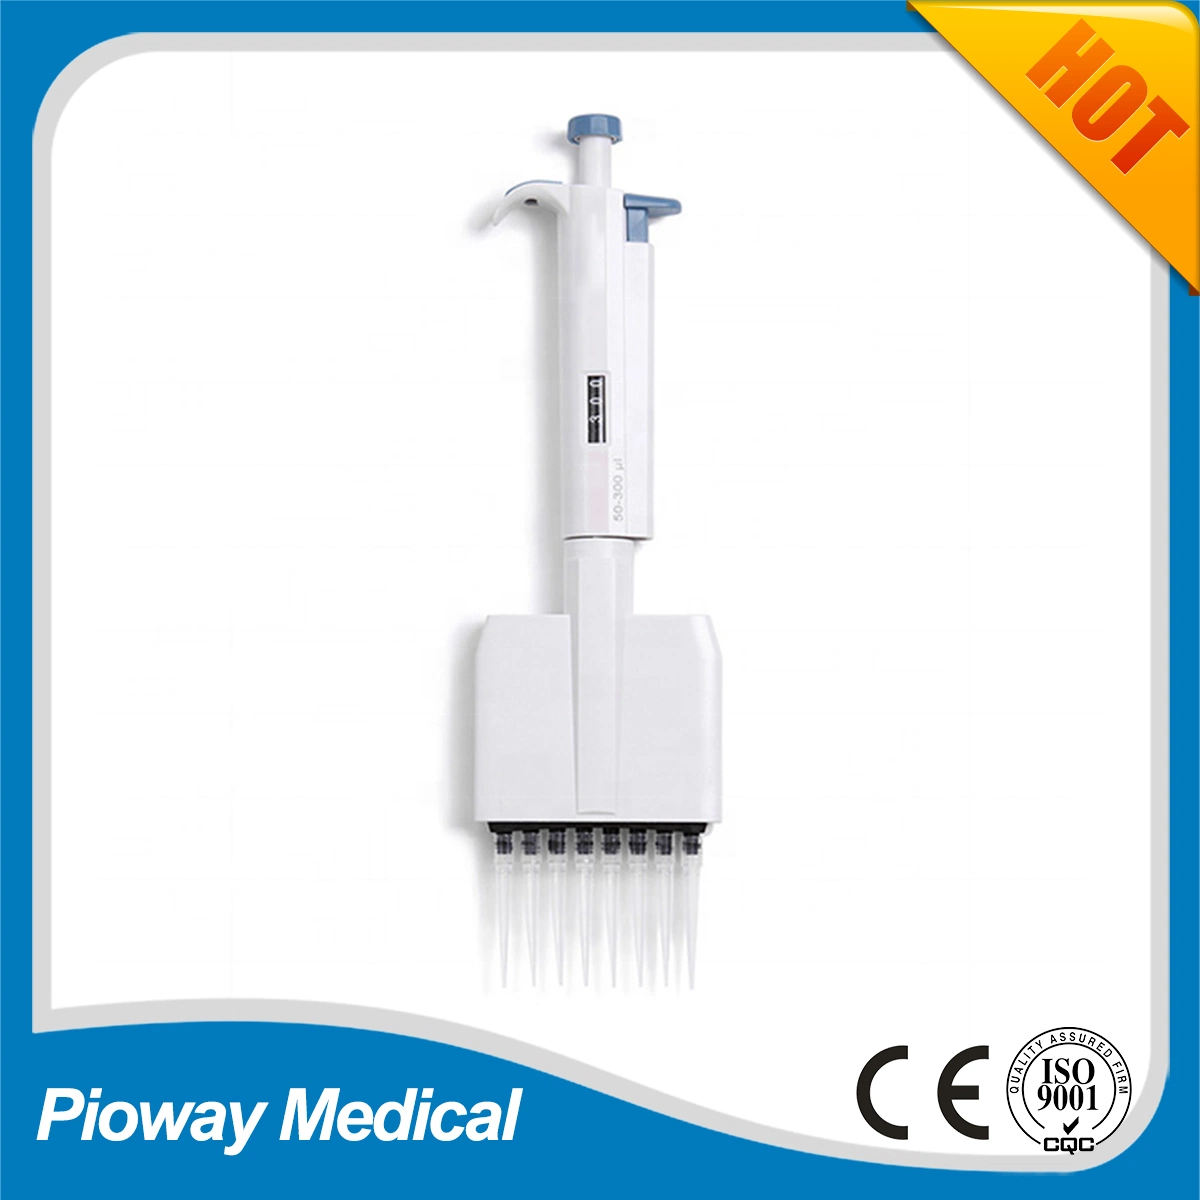 Lab and Medical Equipment Eight Channels Adjustable Volume Manual Pipettes (Dlab)